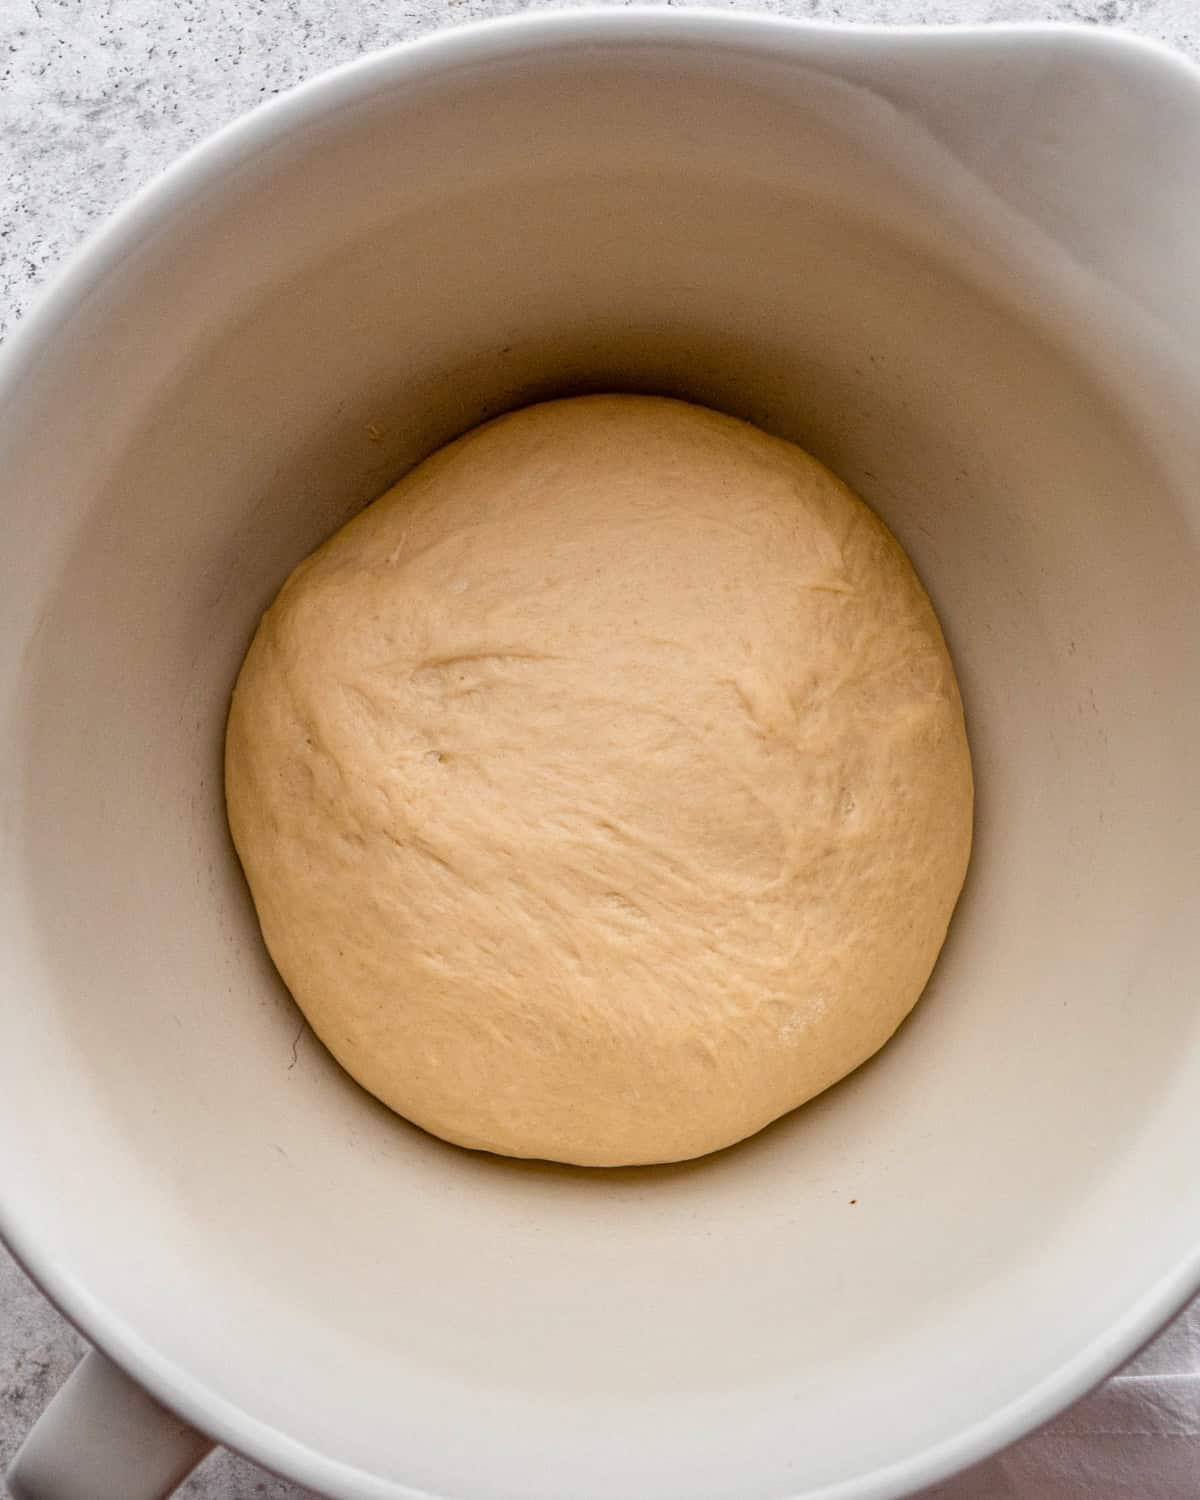 How to Make Pretzel Bread - dough in a bowl before rising